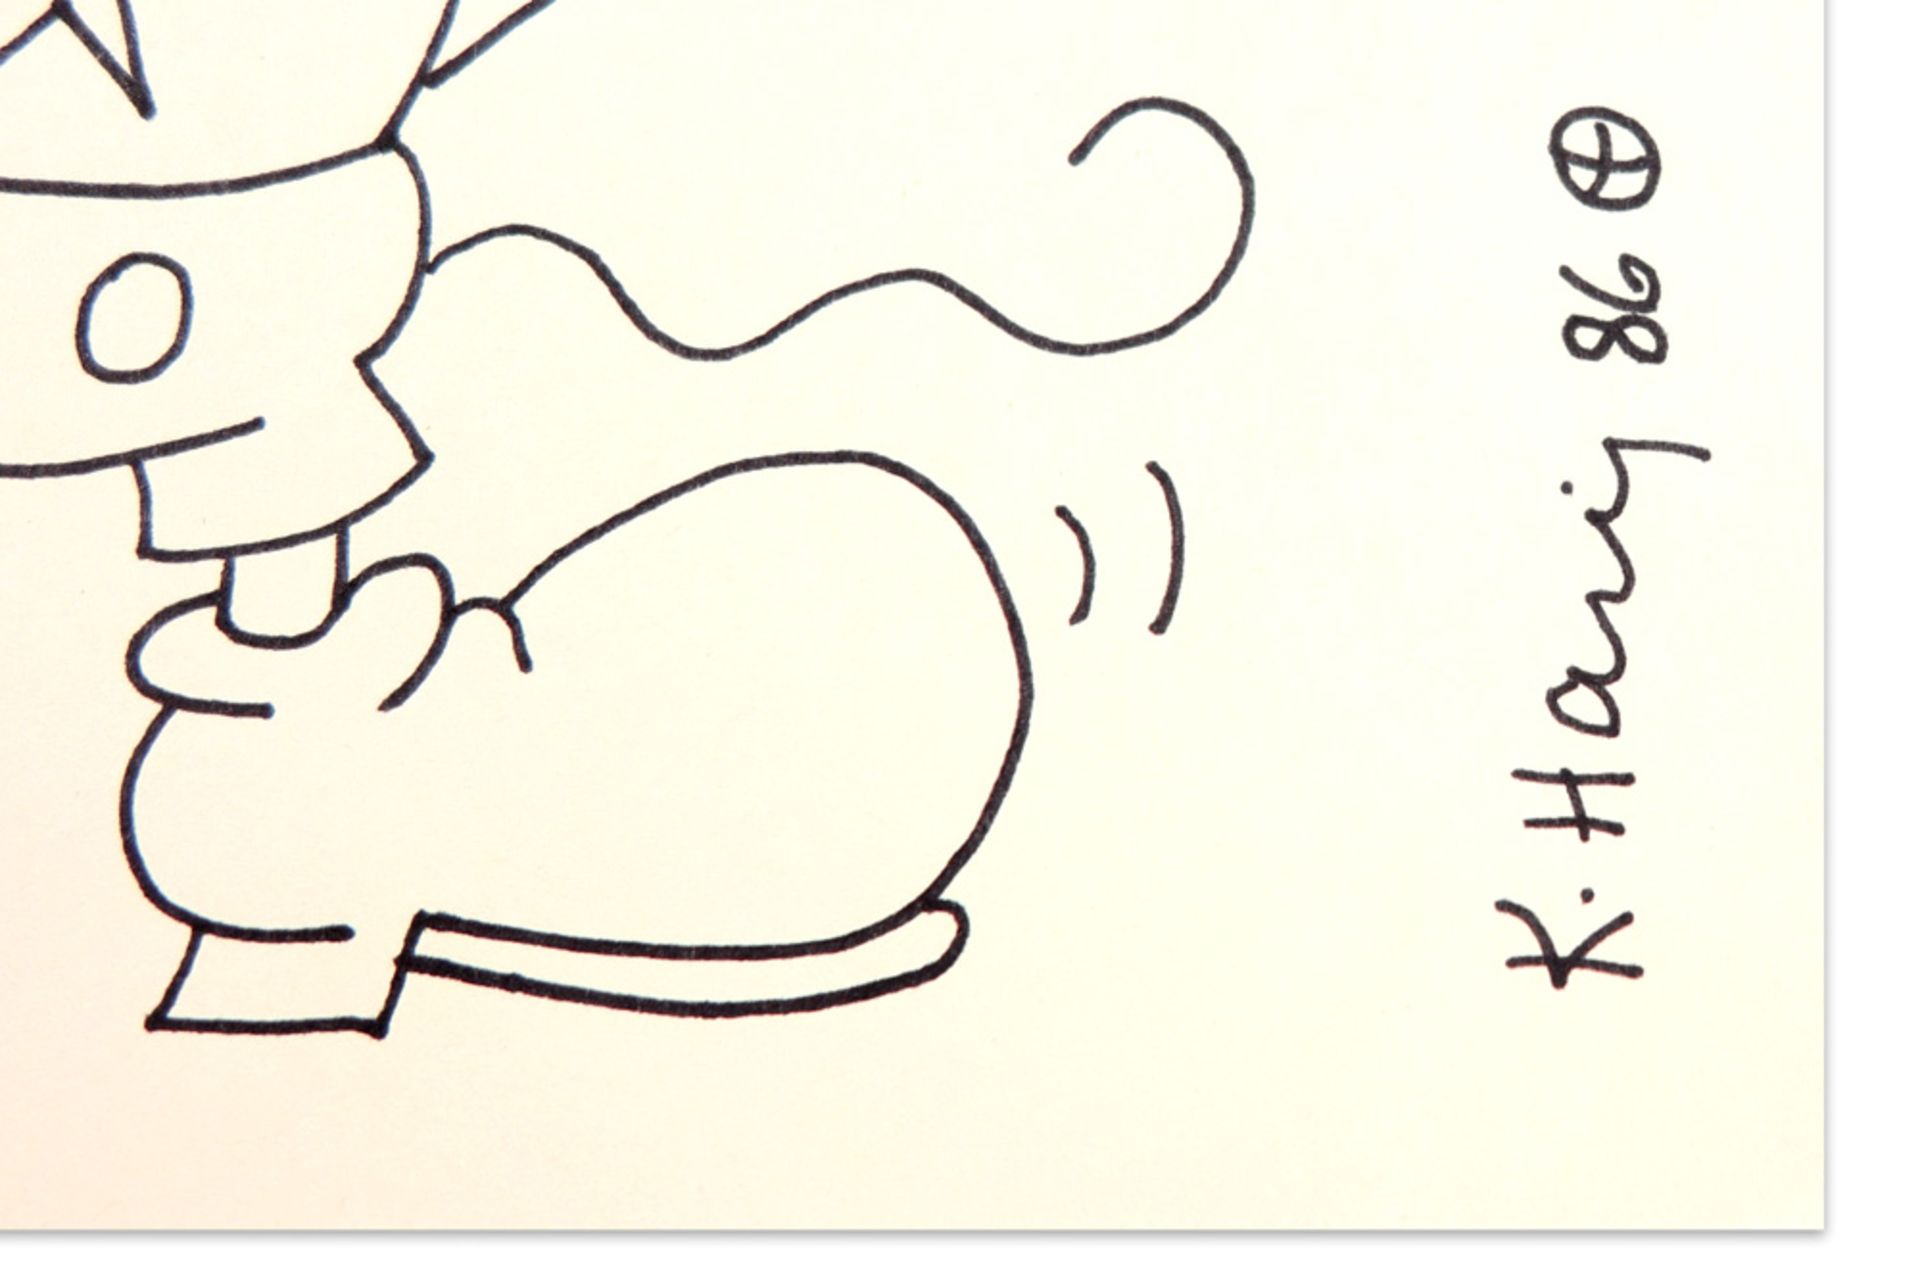 Keith Haring "Andy Mouse" drawing on writing paper of "The Estate" - signed and dated (19)86 || - Image 2 of 4